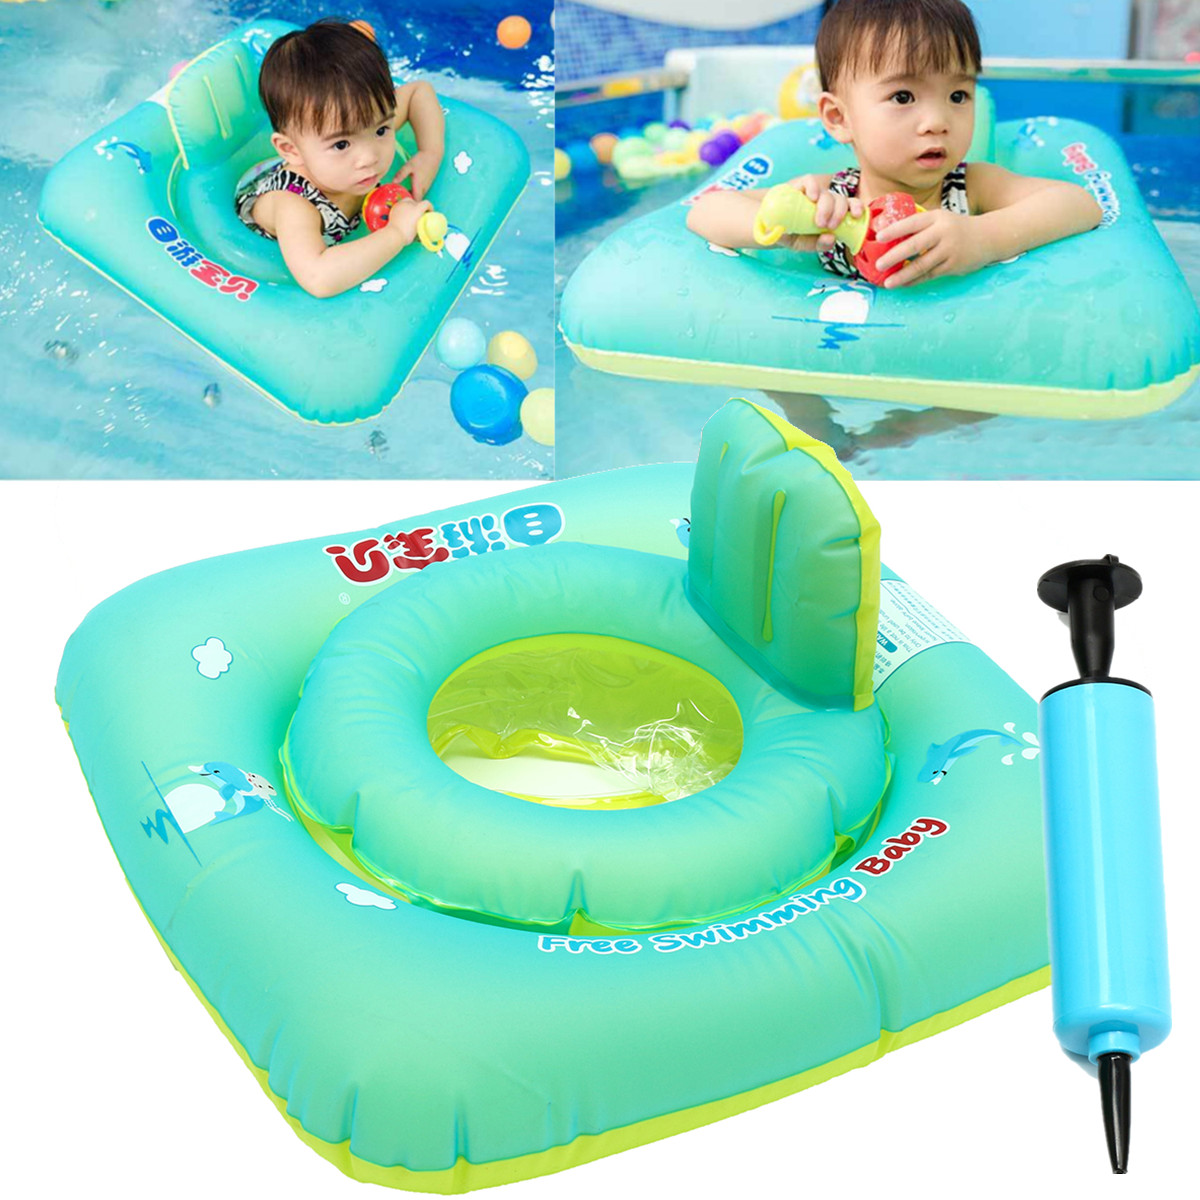 Baby-Inflatable-Swimming-Pool-Floats-Swim-Ride-Rings-Safety-Chair-Raft-Beach-Toy-1293898